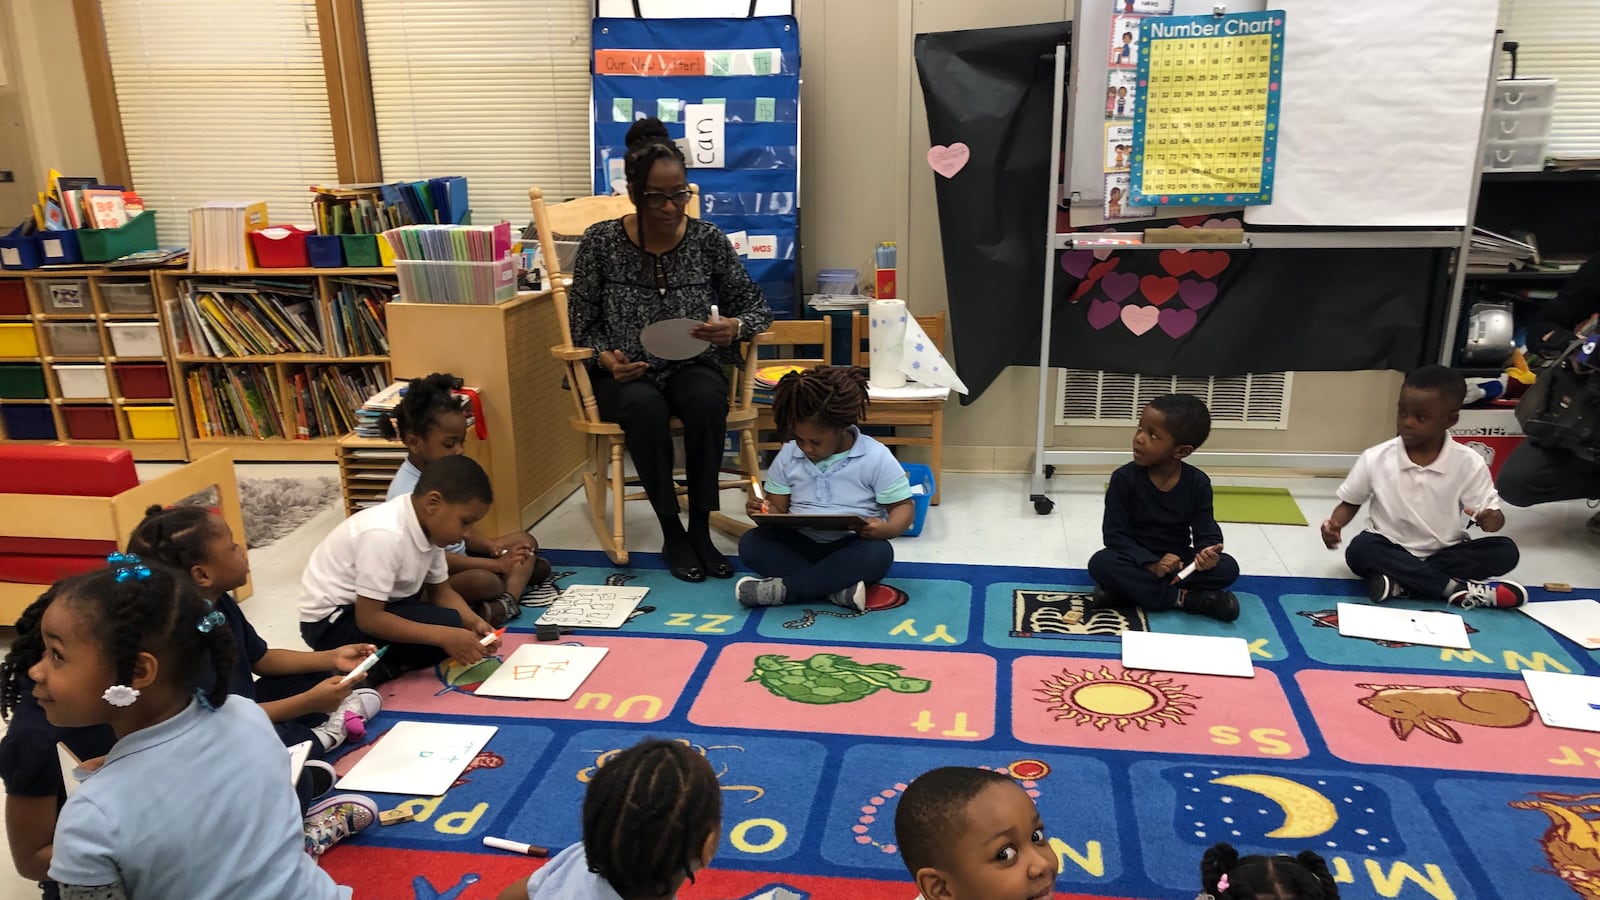 A preschool classroom at John T. Pirie Fine Arts and Academic Center in Chicago's Chatham neighborhood. Chatham is one of 28 neighborhoods where Chicago will expand universal pre-kindergarten next school year.